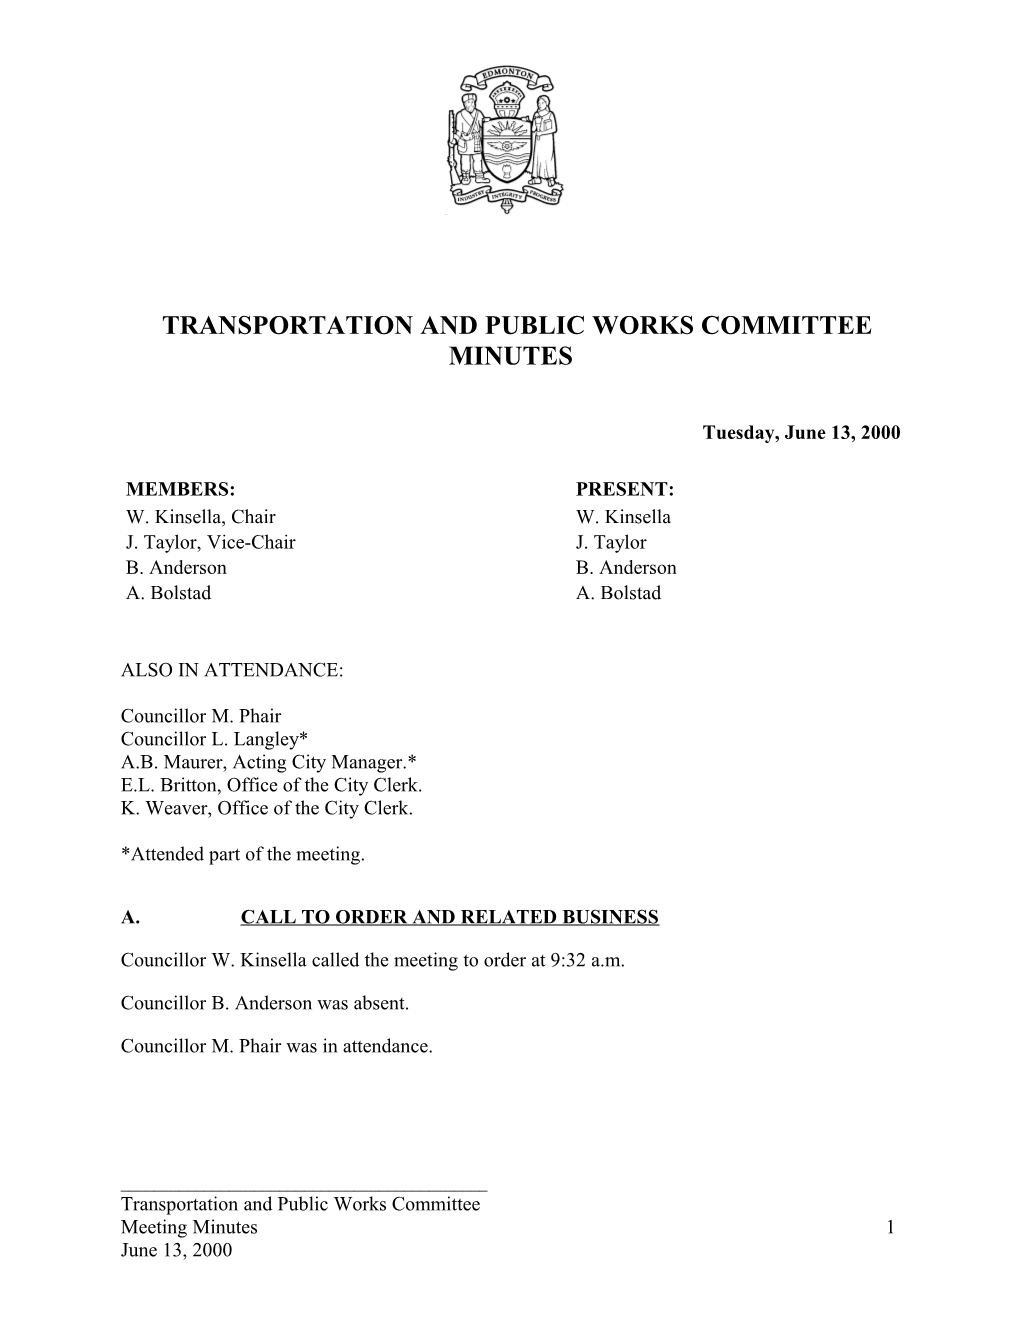 Minutes for Transportation and Public Works Committee June 13, 2000 Meeting